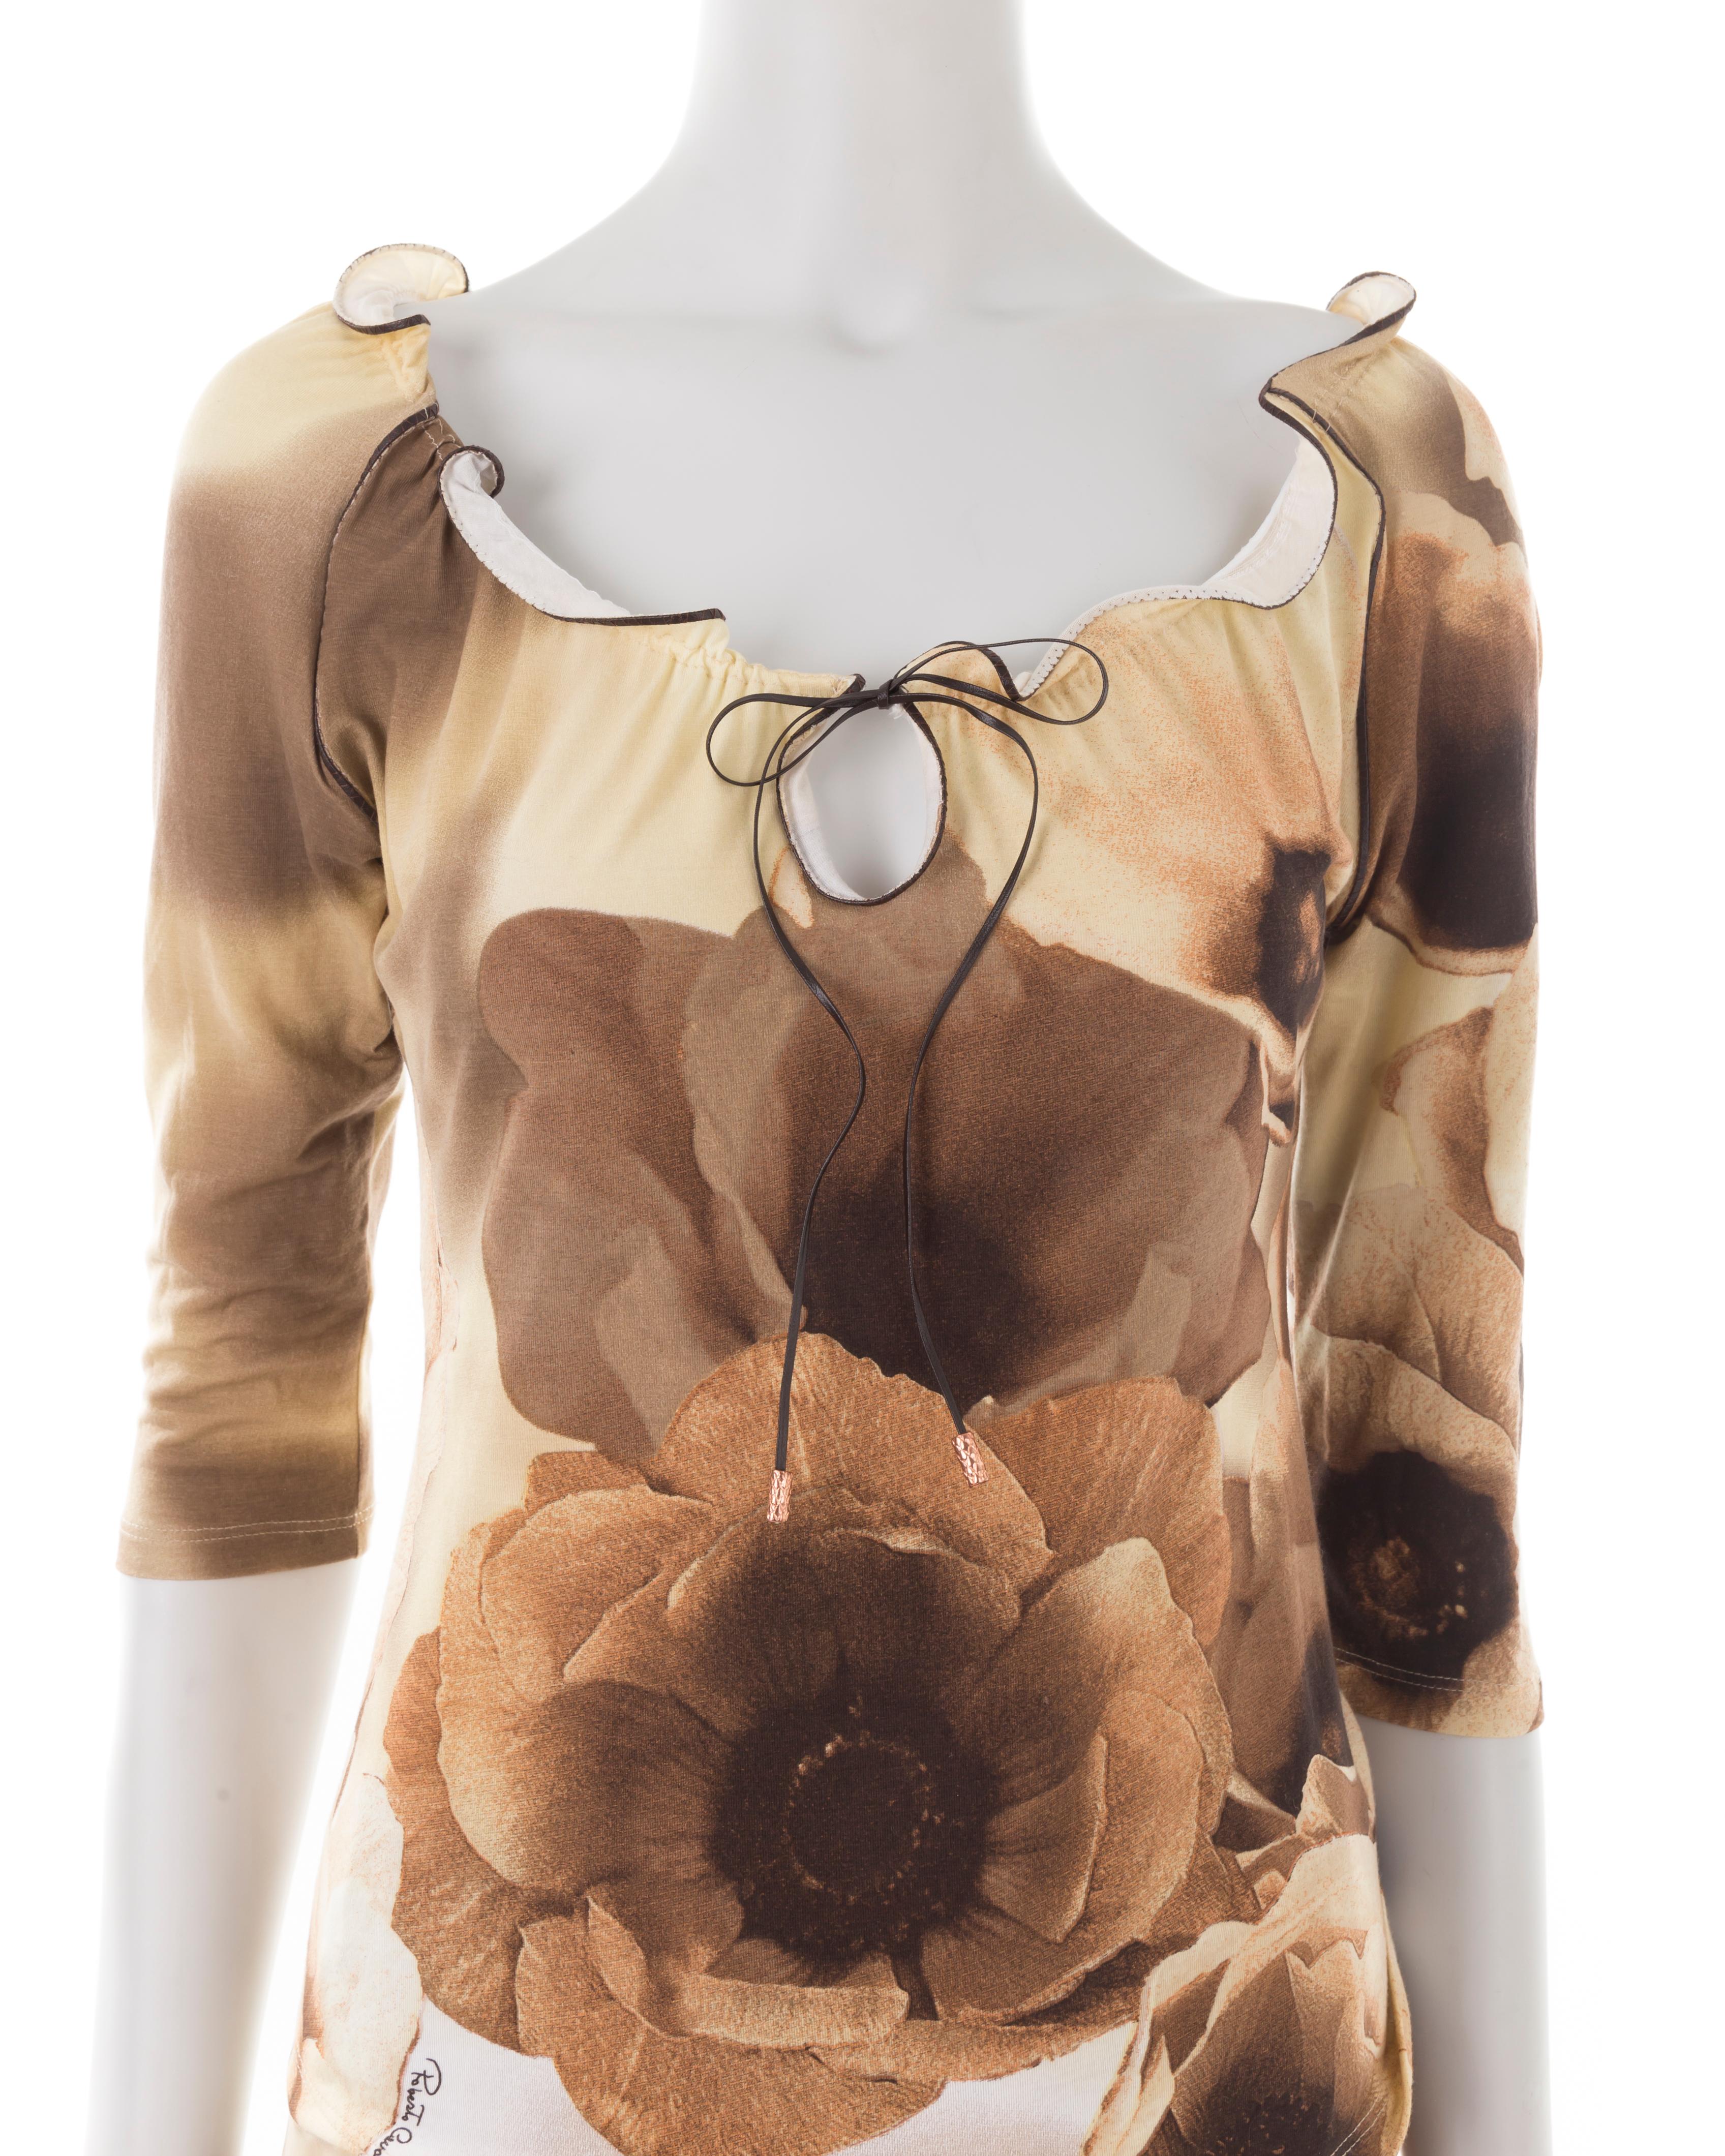 Roberto Cavalli S/S 2002 cream and brown tulip print top and skirt set For Sale 2